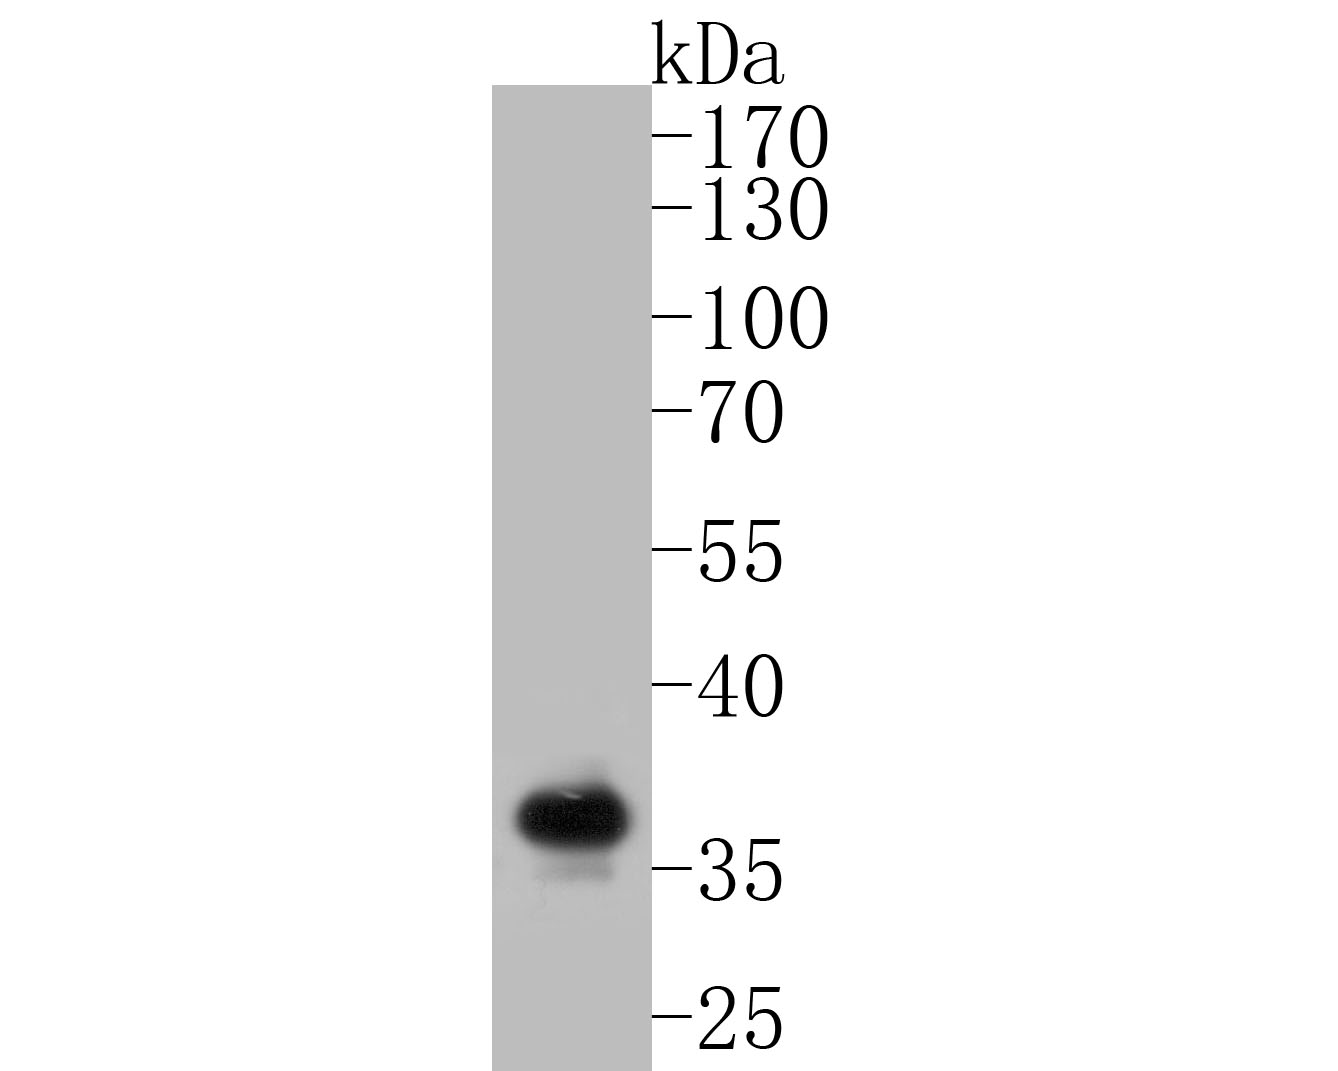 Western blot analysis of Syntaxin 1a on mouse bone marrow tissue lysates. Proteins were transferred to a PVDF membrane and blocked with 5% BSA in PBS for 1 hour at room temperature. The primary antibody (ET7110-68, 1/500) was used in 5% BSA at room temperature for 2 hours. Goat Anti-Rabbit IgG - HRP Secondary Antibody (HA1001) at 1:5,000 dilution was used for 1 hour at room temperature.